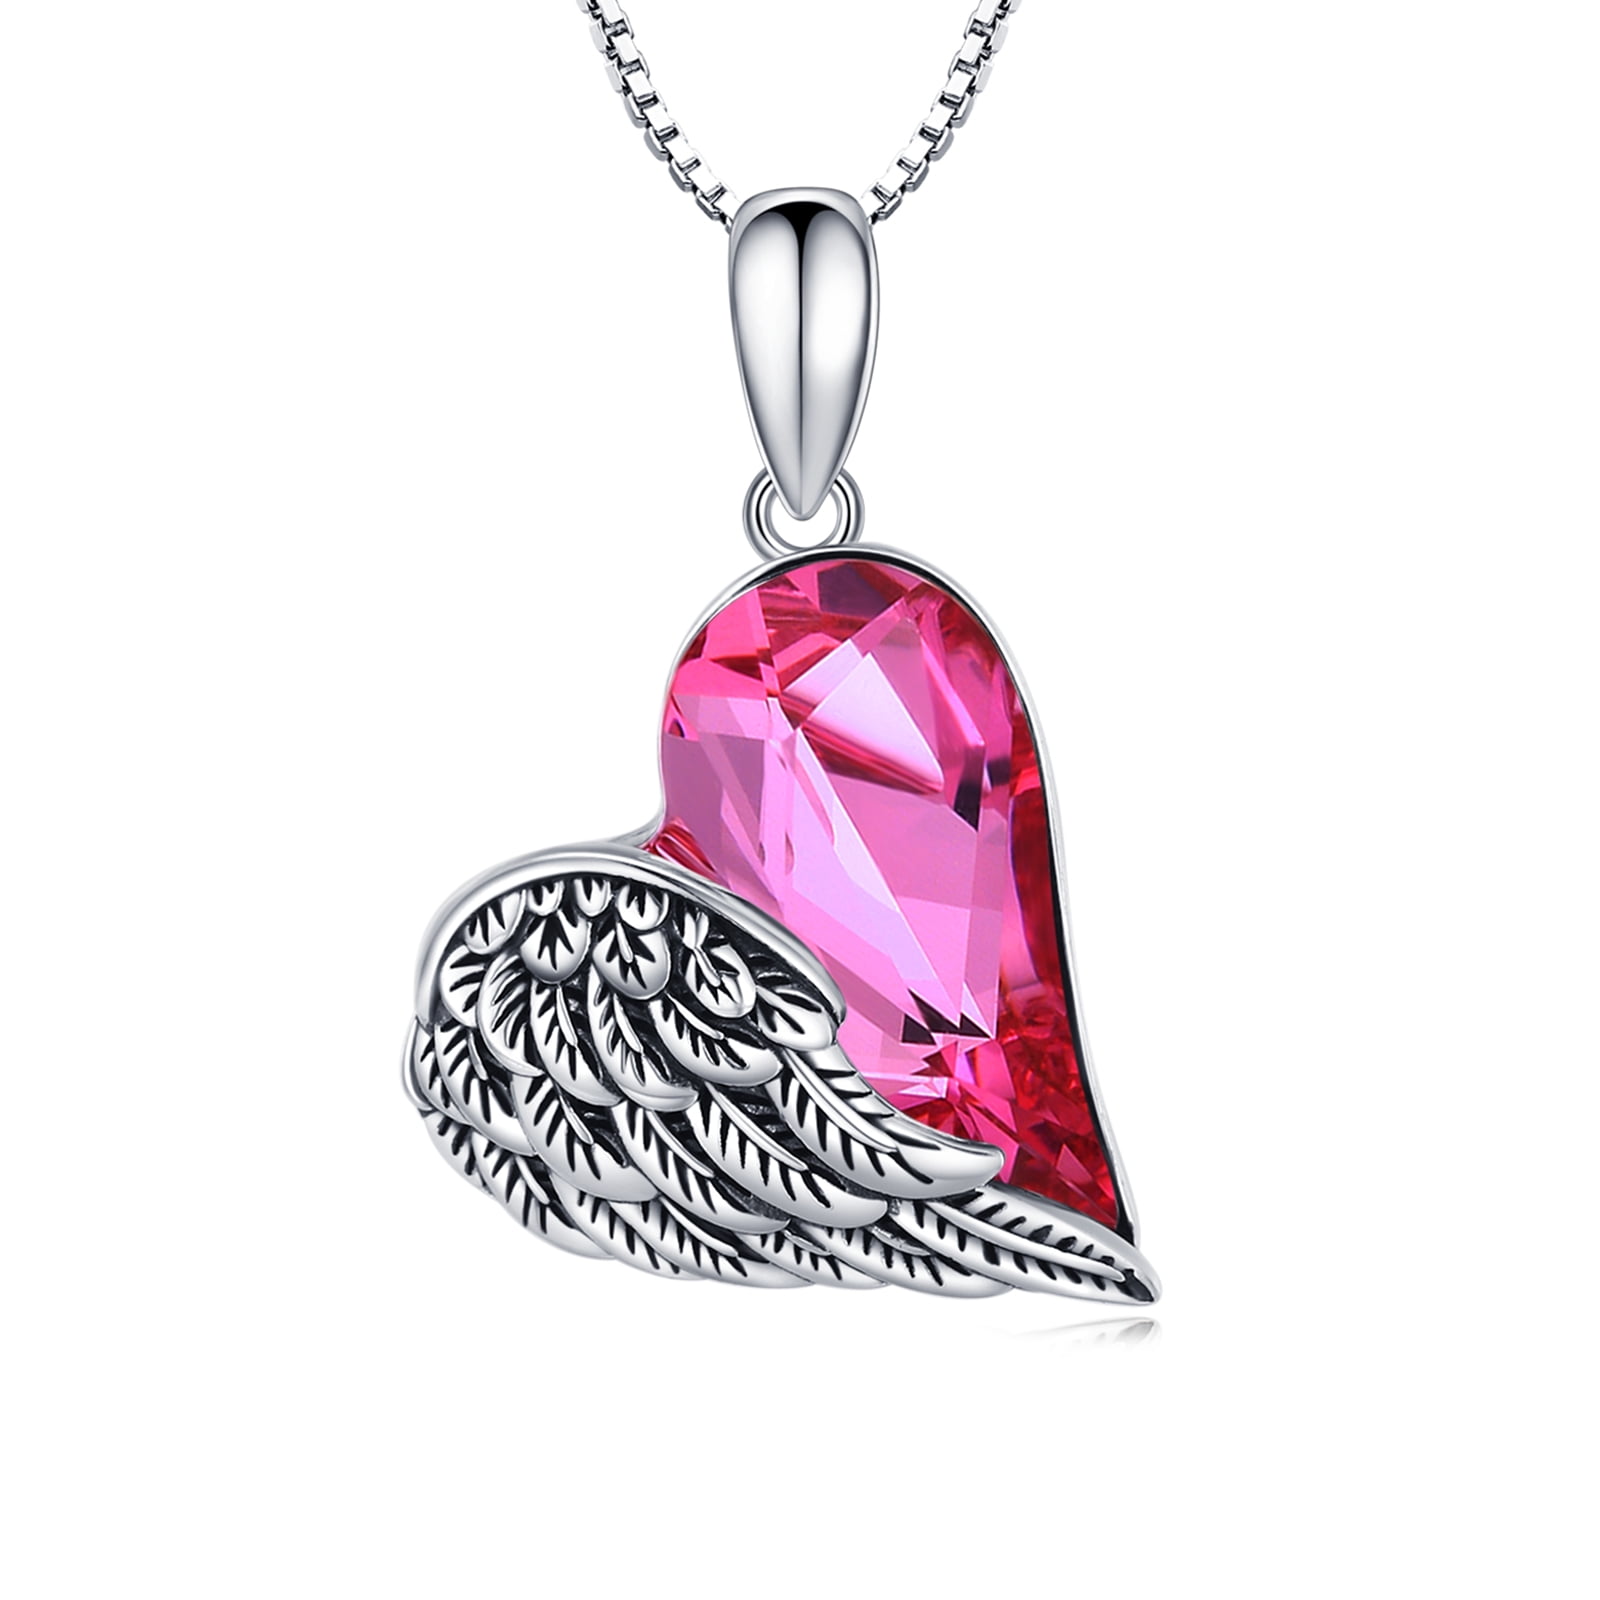 Amulet Angel Wings and Heart Love Powers Protect Energy Rose Quartz Puffy Heart Pendant 18 Inch Necklace